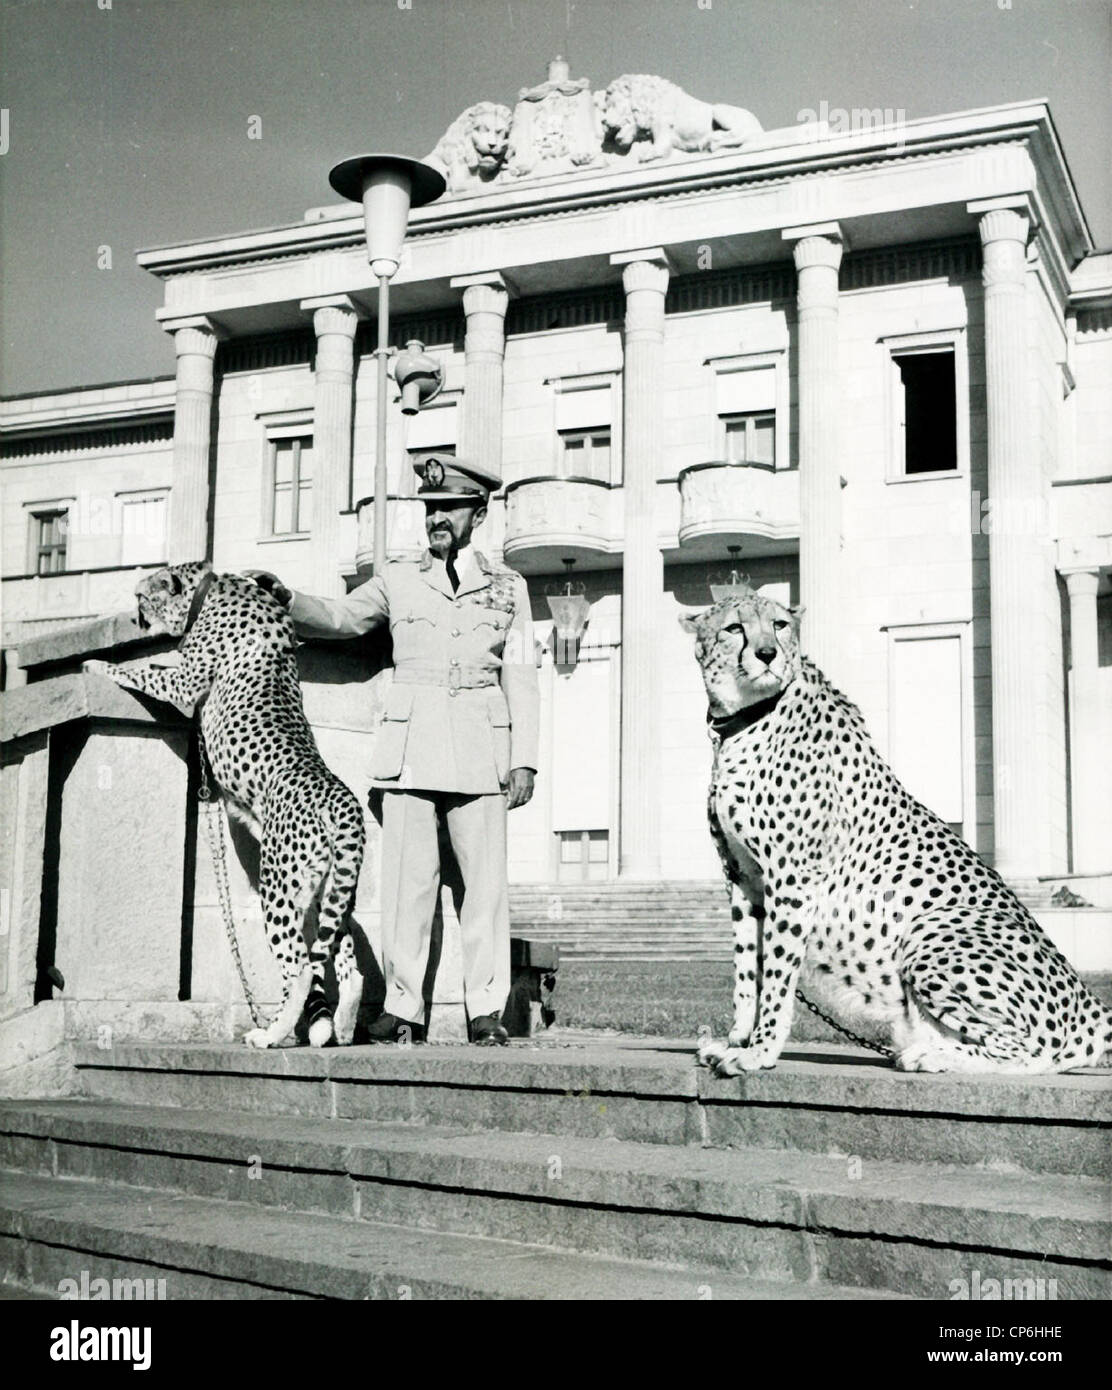 Emperor Haile Selassie of Ethiopia with Pet Cheetahs at Palace Stock Photo